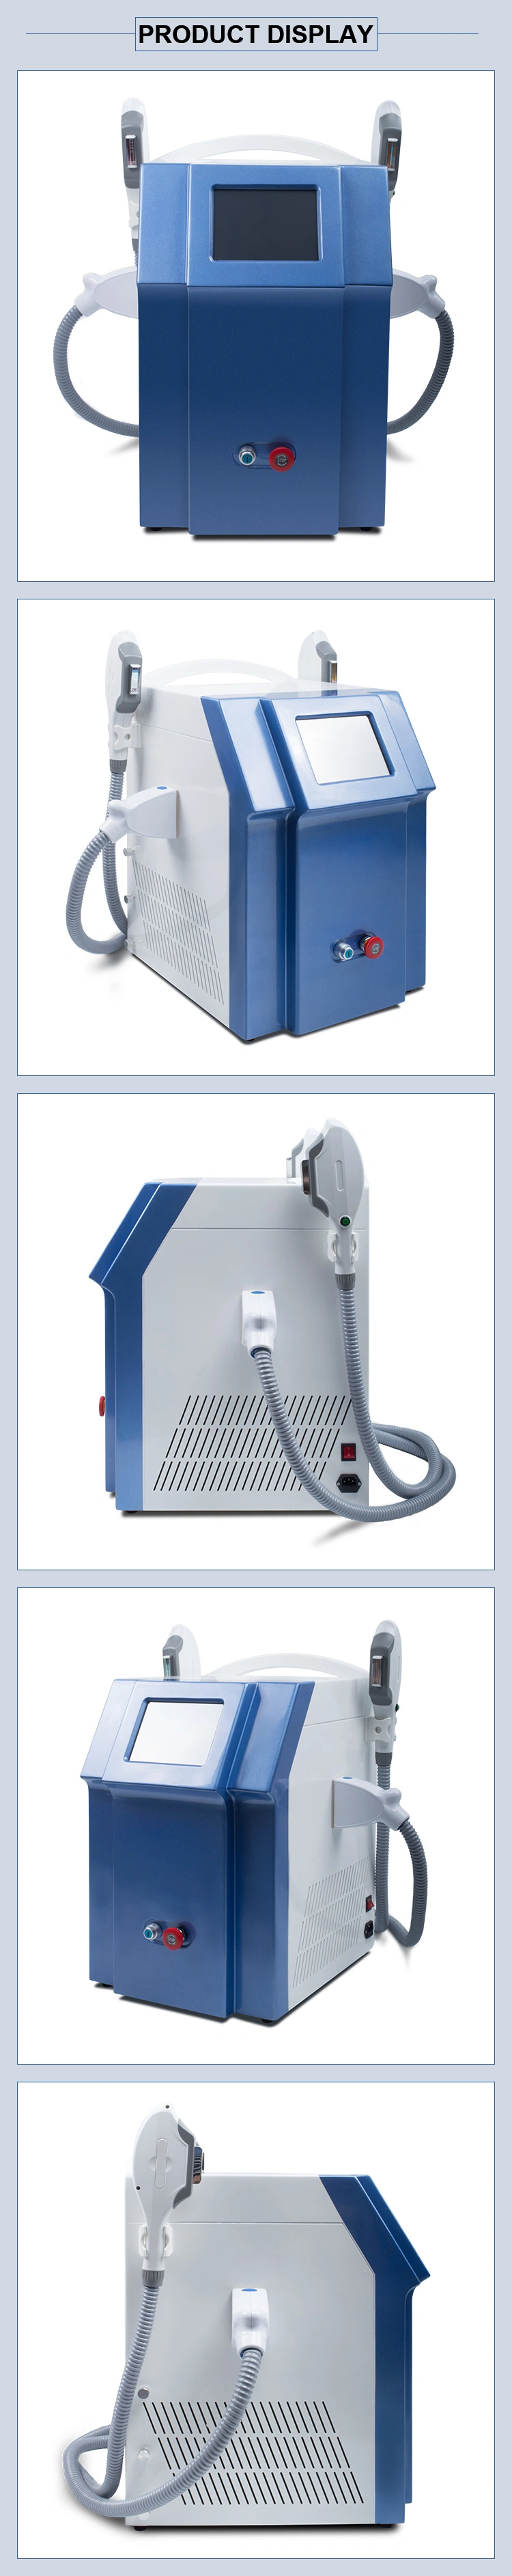 Two Handles IPL Shr Machine for Skin Care&Hair Removal Beauty Equipment